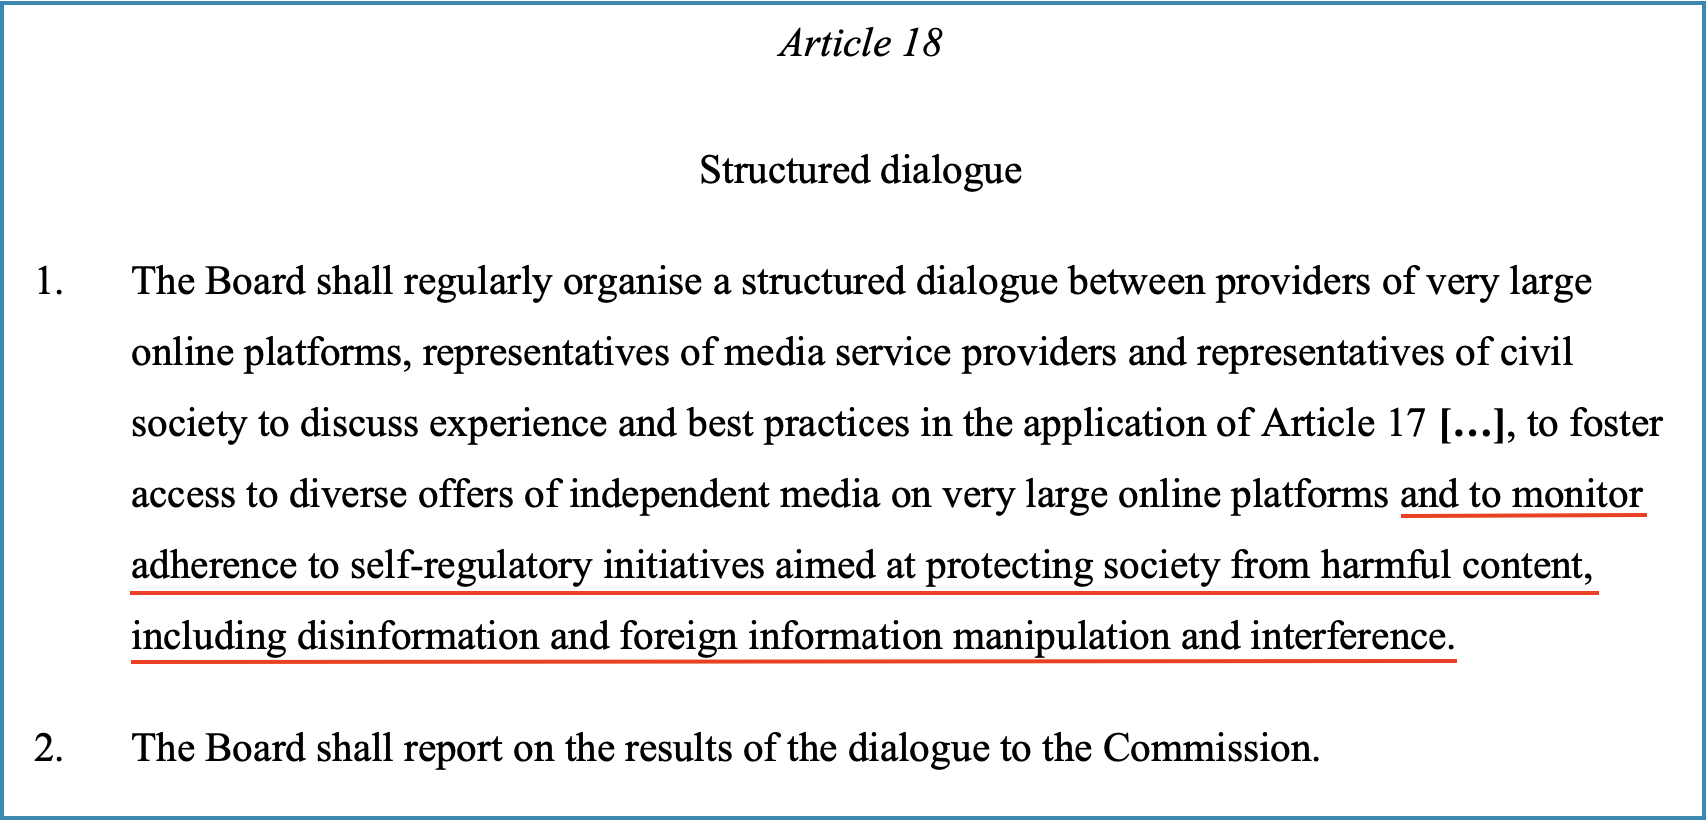 Article 18 - Structured dialogue